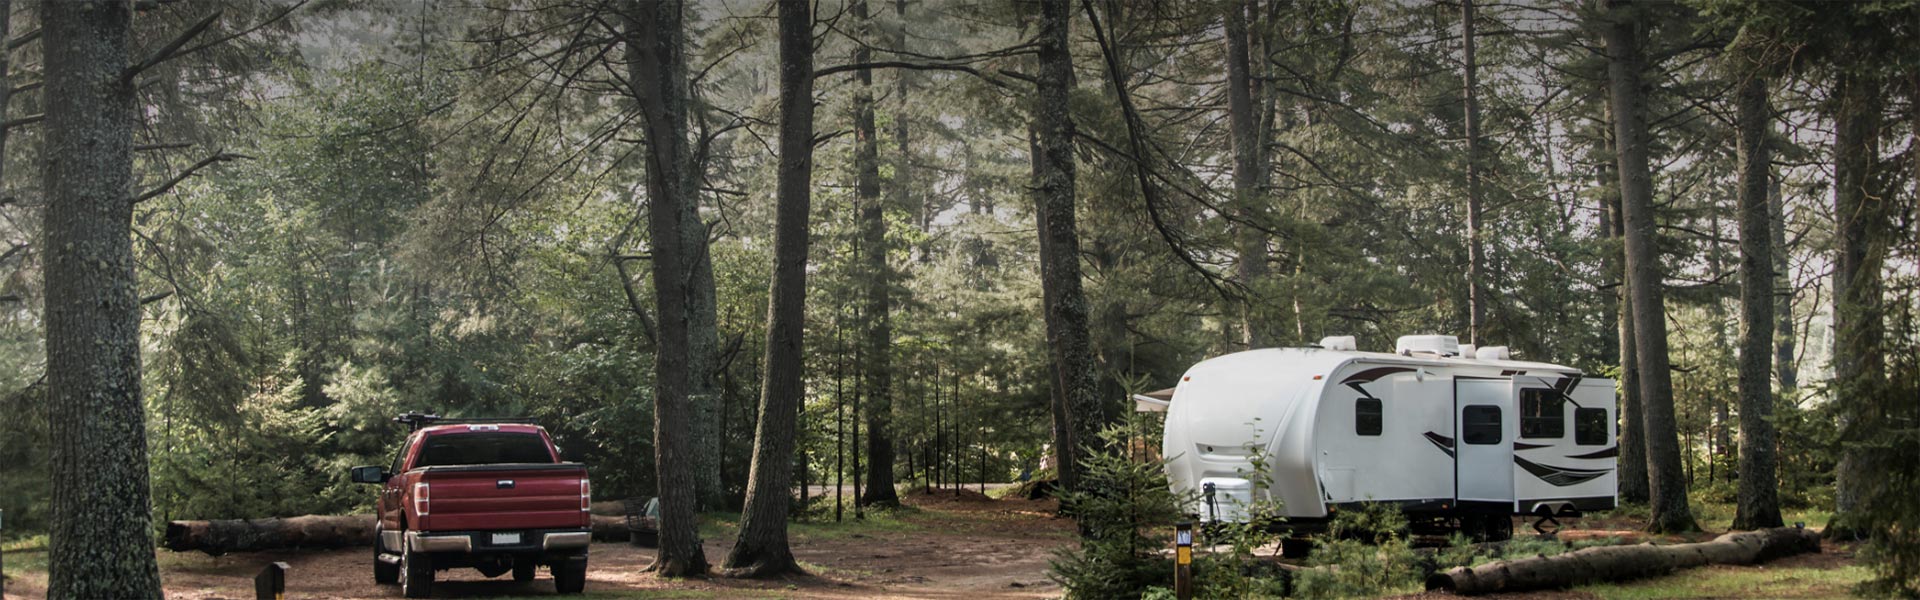 How One Idea to Make More Money Changed the RV Rental Industry